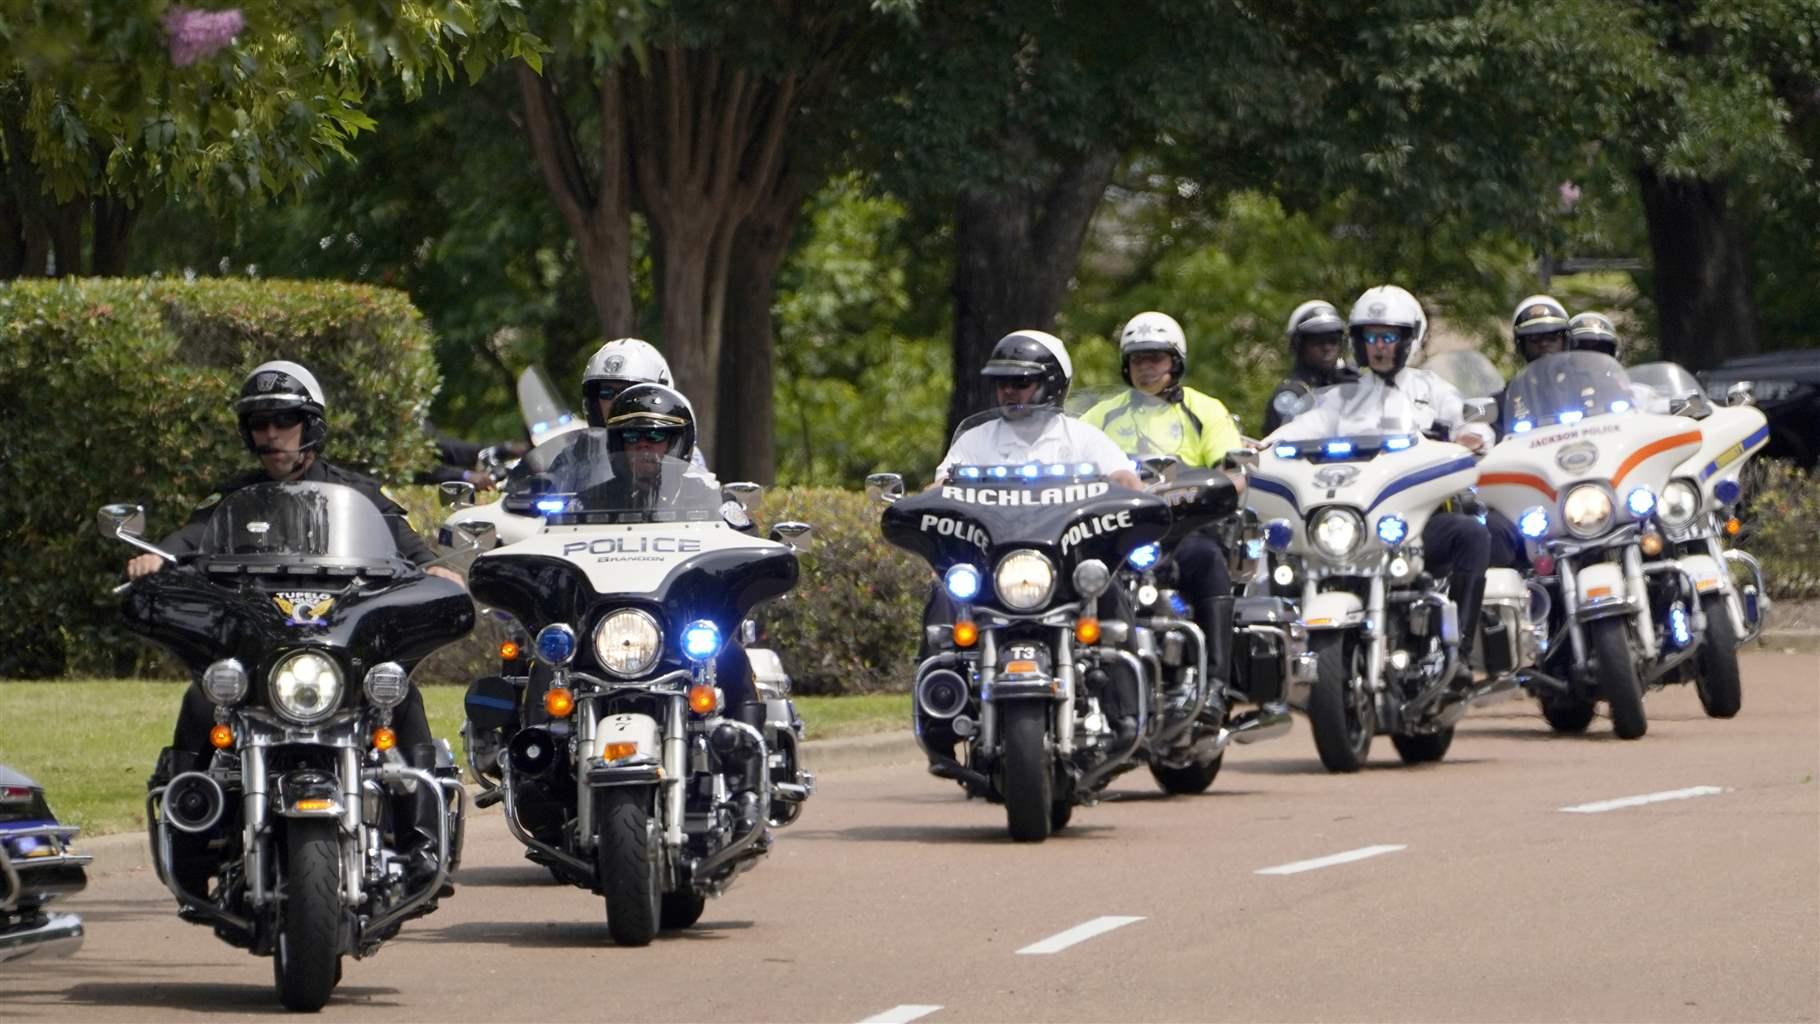 A motorcycle escort of lawmen from area agencies were among the motorcade led by members of the Mississippi Highway Patrol preceding the hearse bearing the body of Trooper John Harris, Tuesday, June 1, 2021, in Madison, Miss., as it is driven to Broadmoor Baptist Church for funeral services.